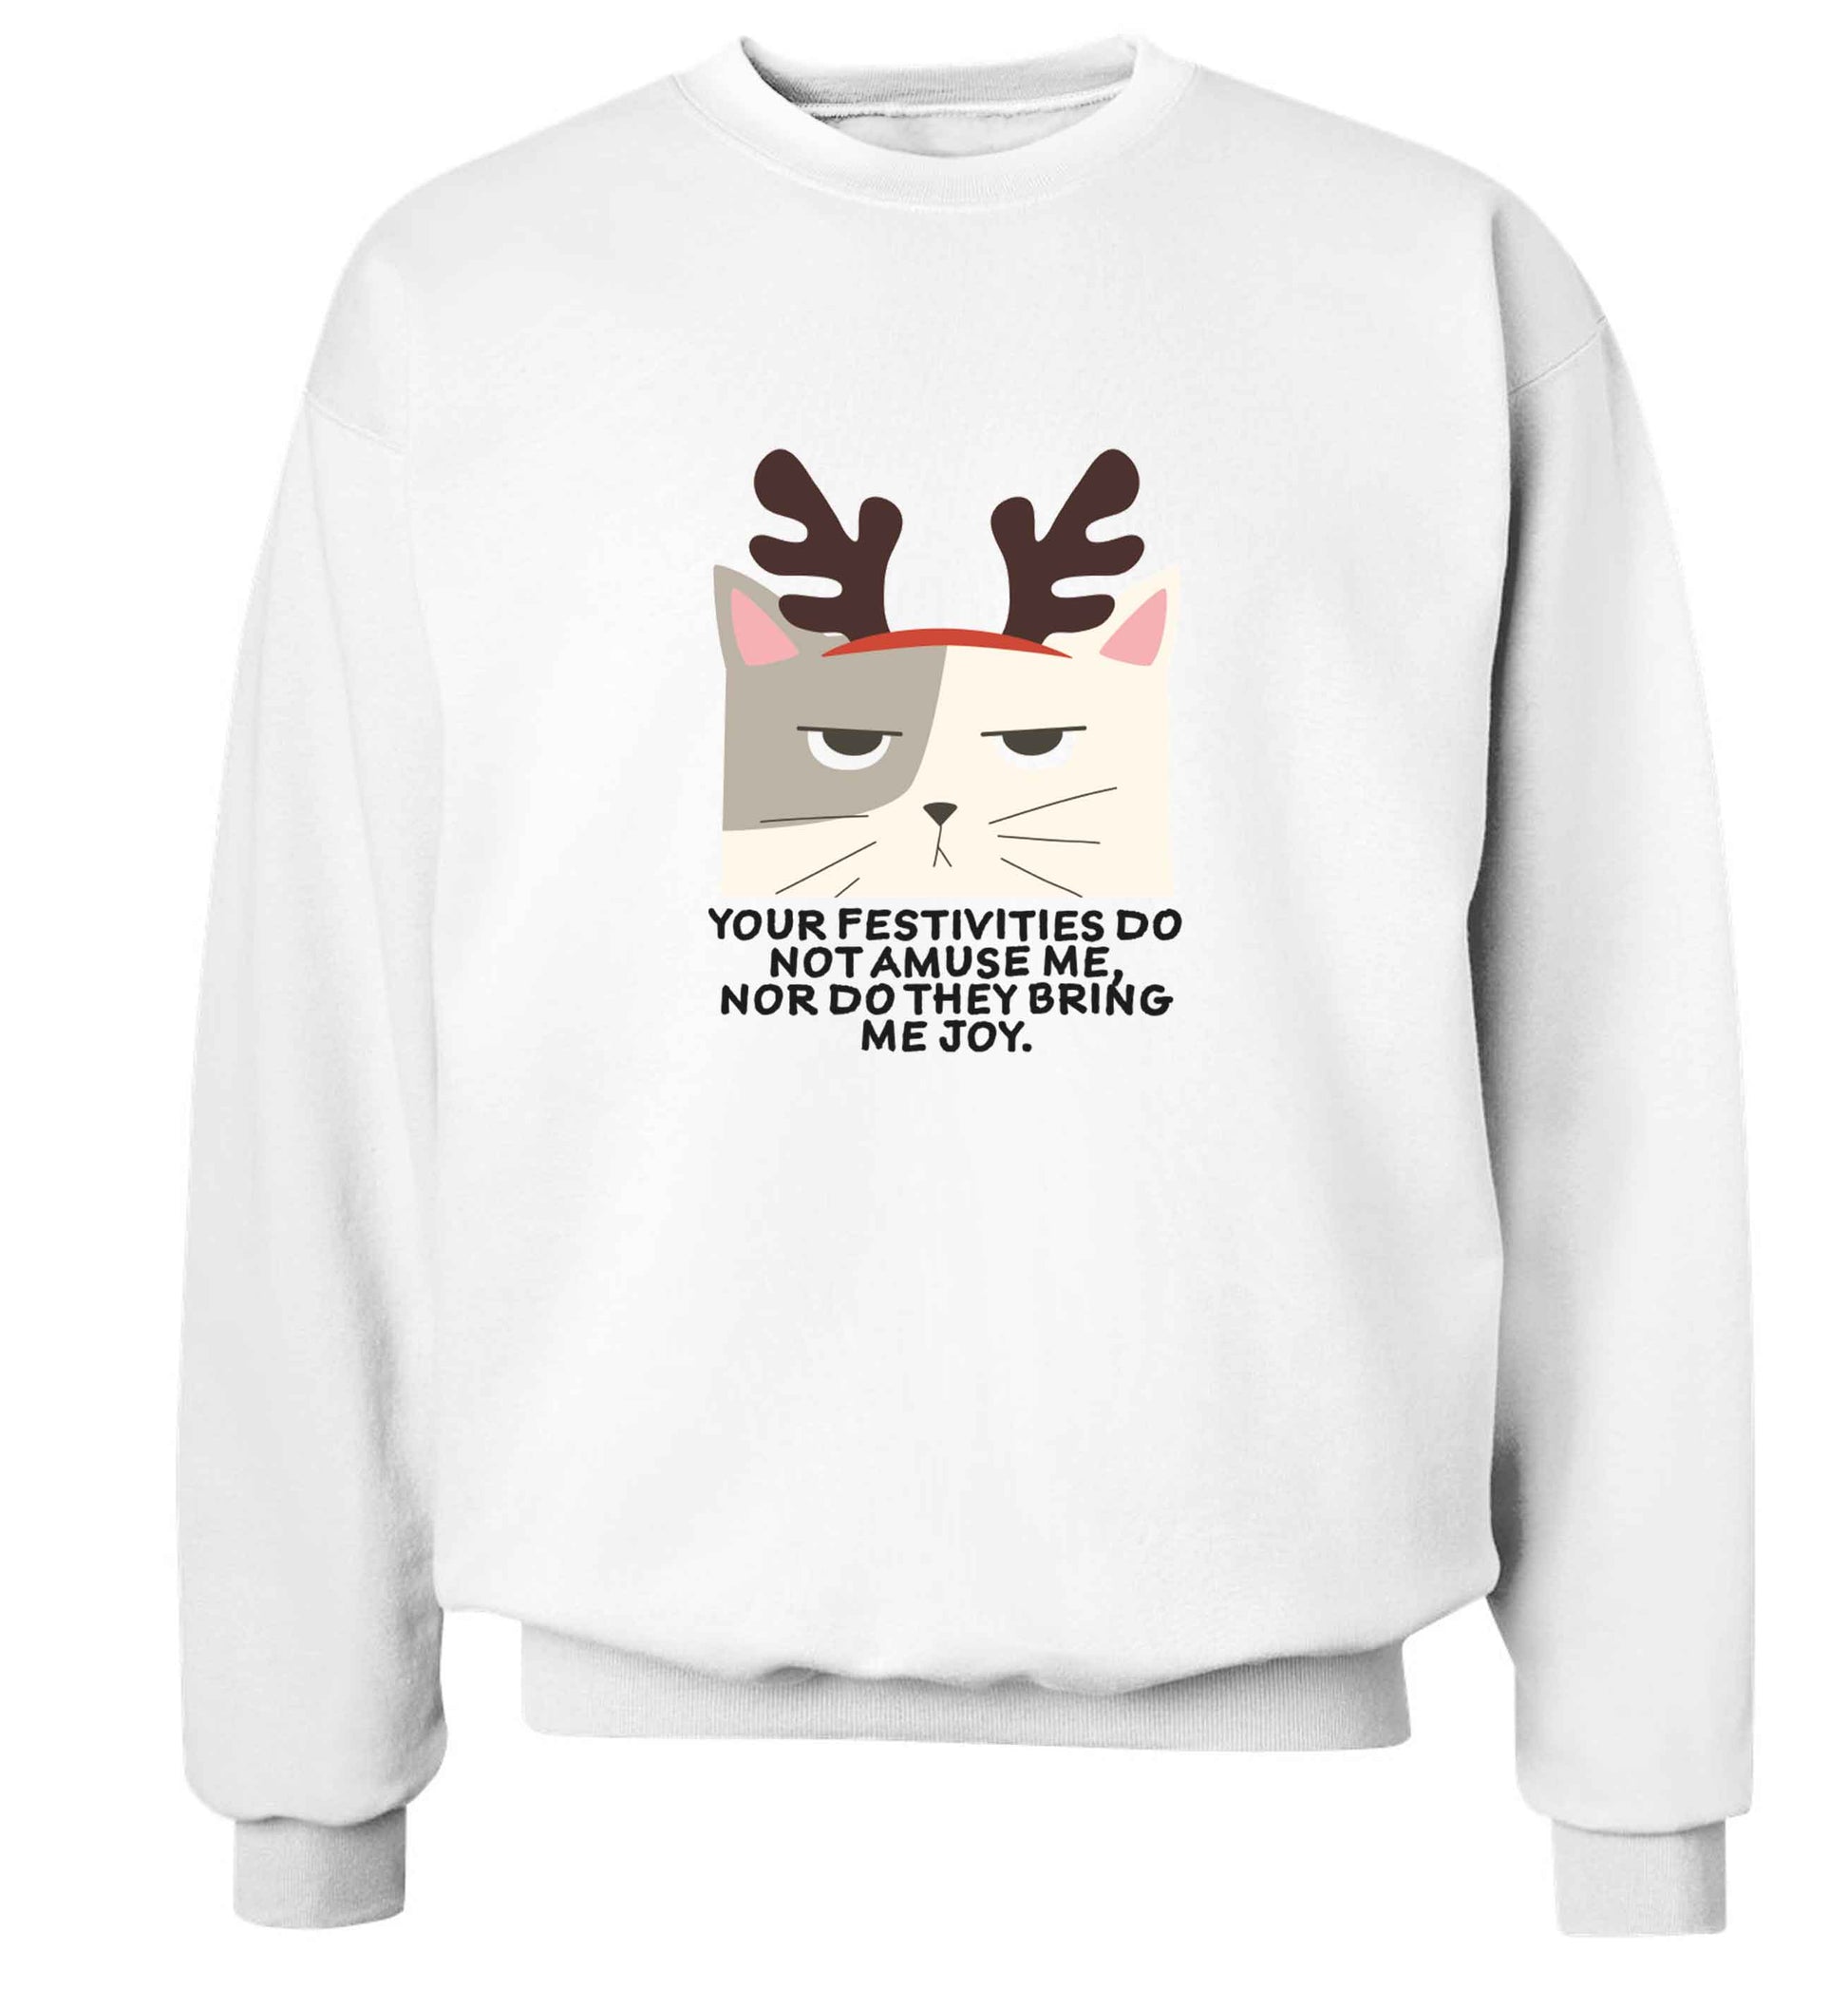 Your festivities do not amuse me nor do they bring me joy adult's unisex white sweater 2XL